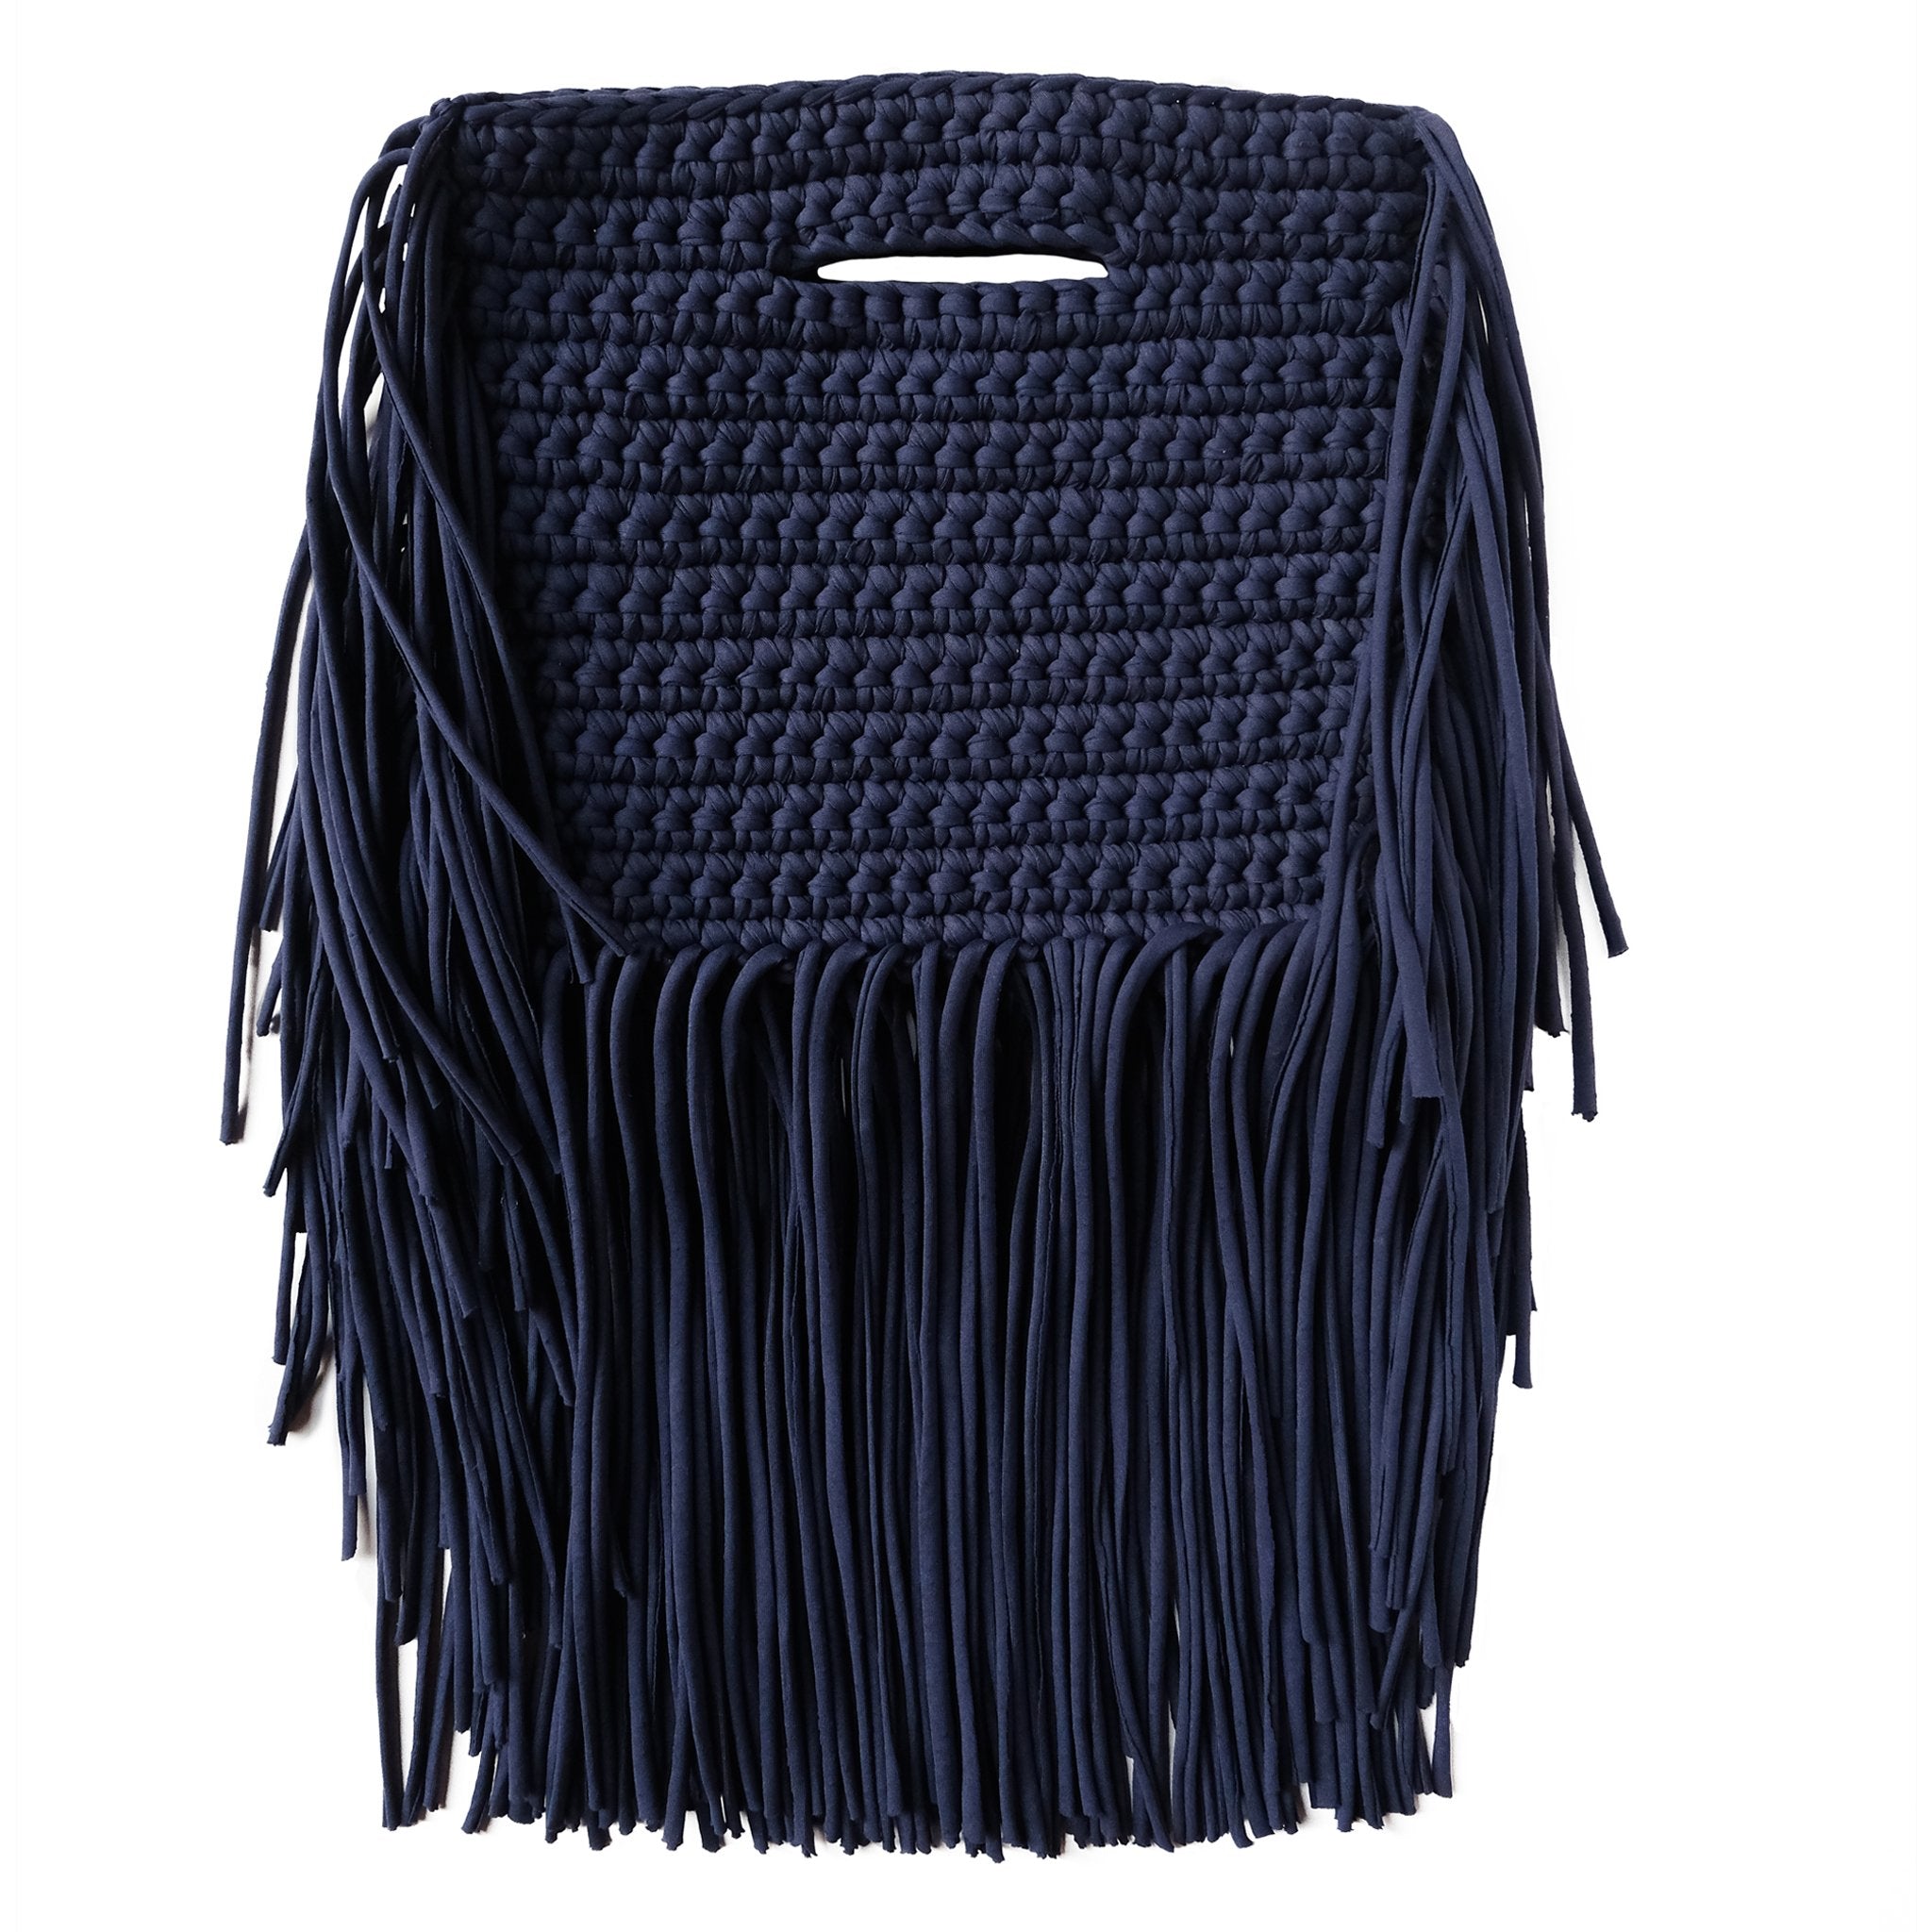 Handcrafted Clutch in Navy with Fringe made from upcycled cotton by Binge Knitting